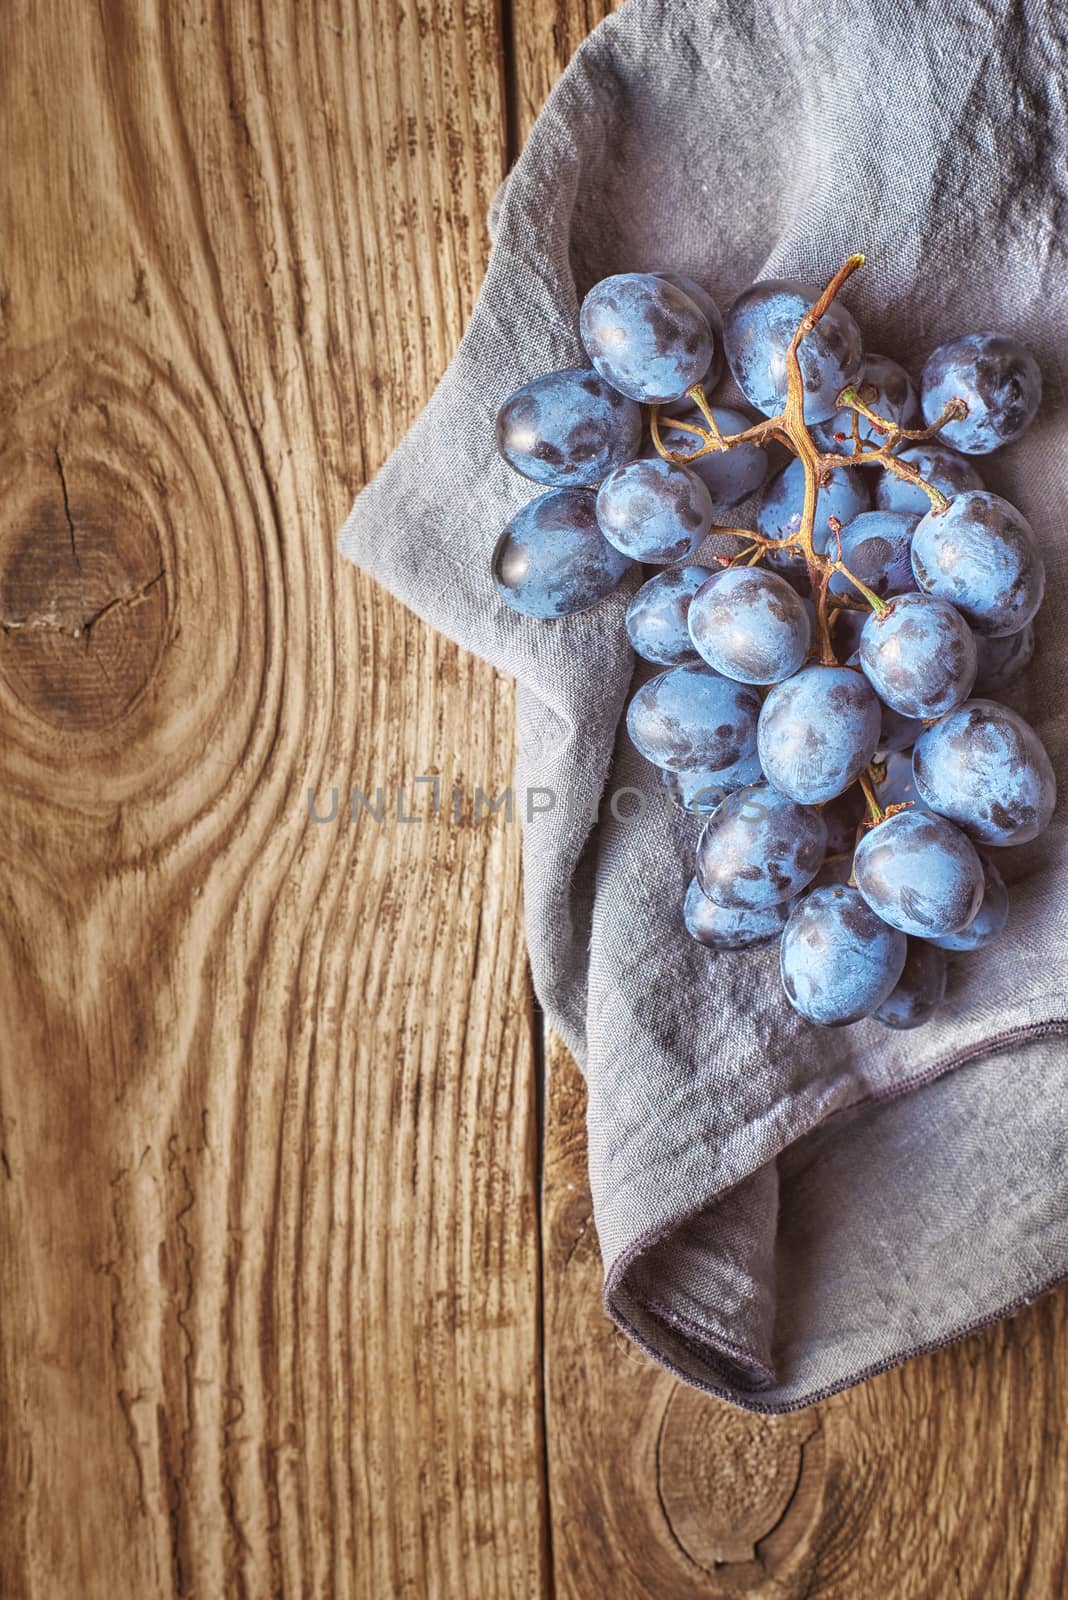 Bunch of grapes on the wooden table top view by Deniskarpenkov